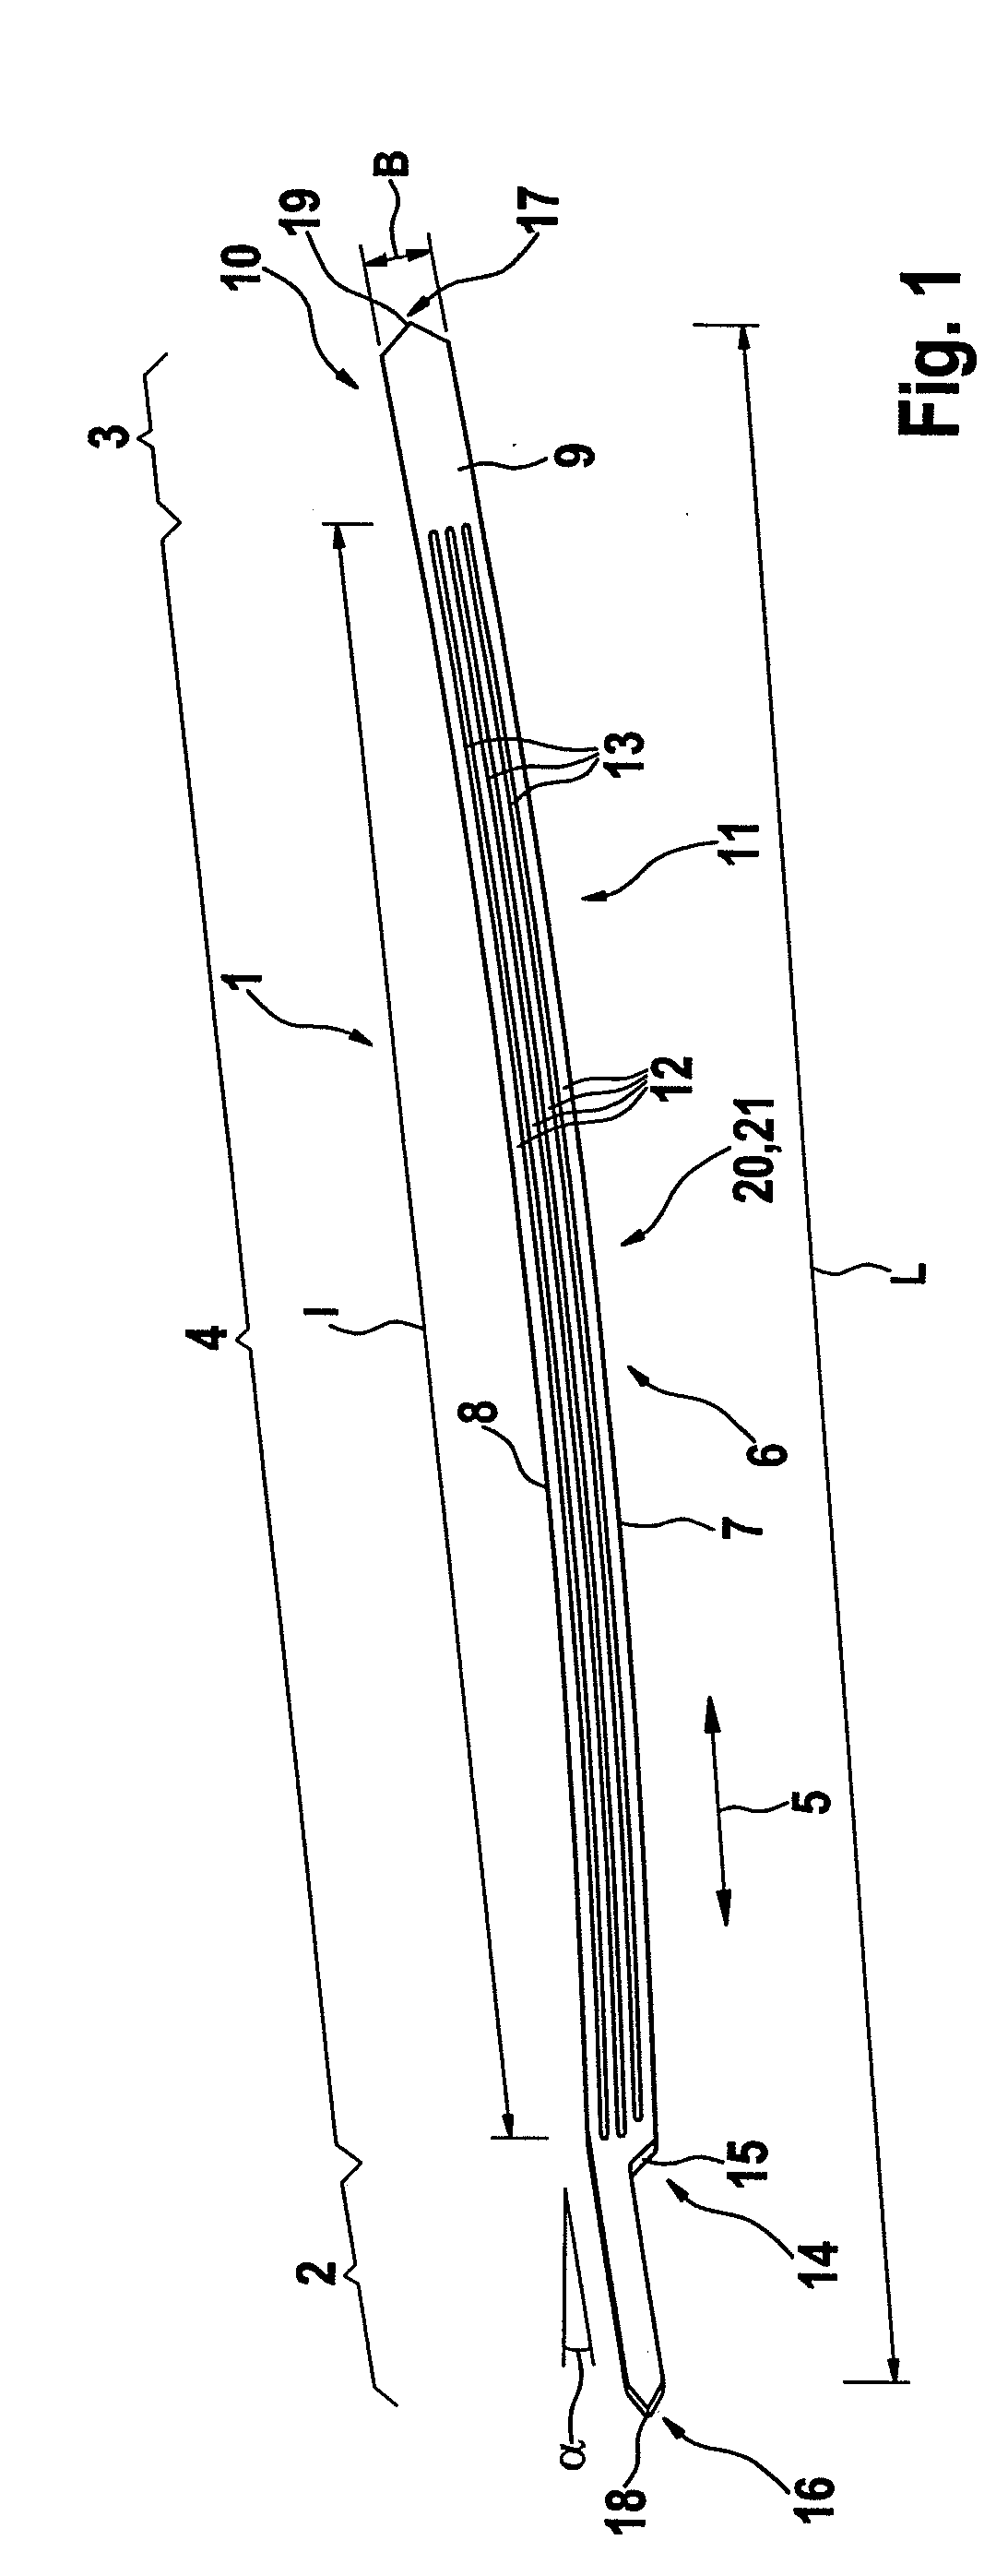 Electrical contact element for contacting an electrical test sample and contacting apparatus